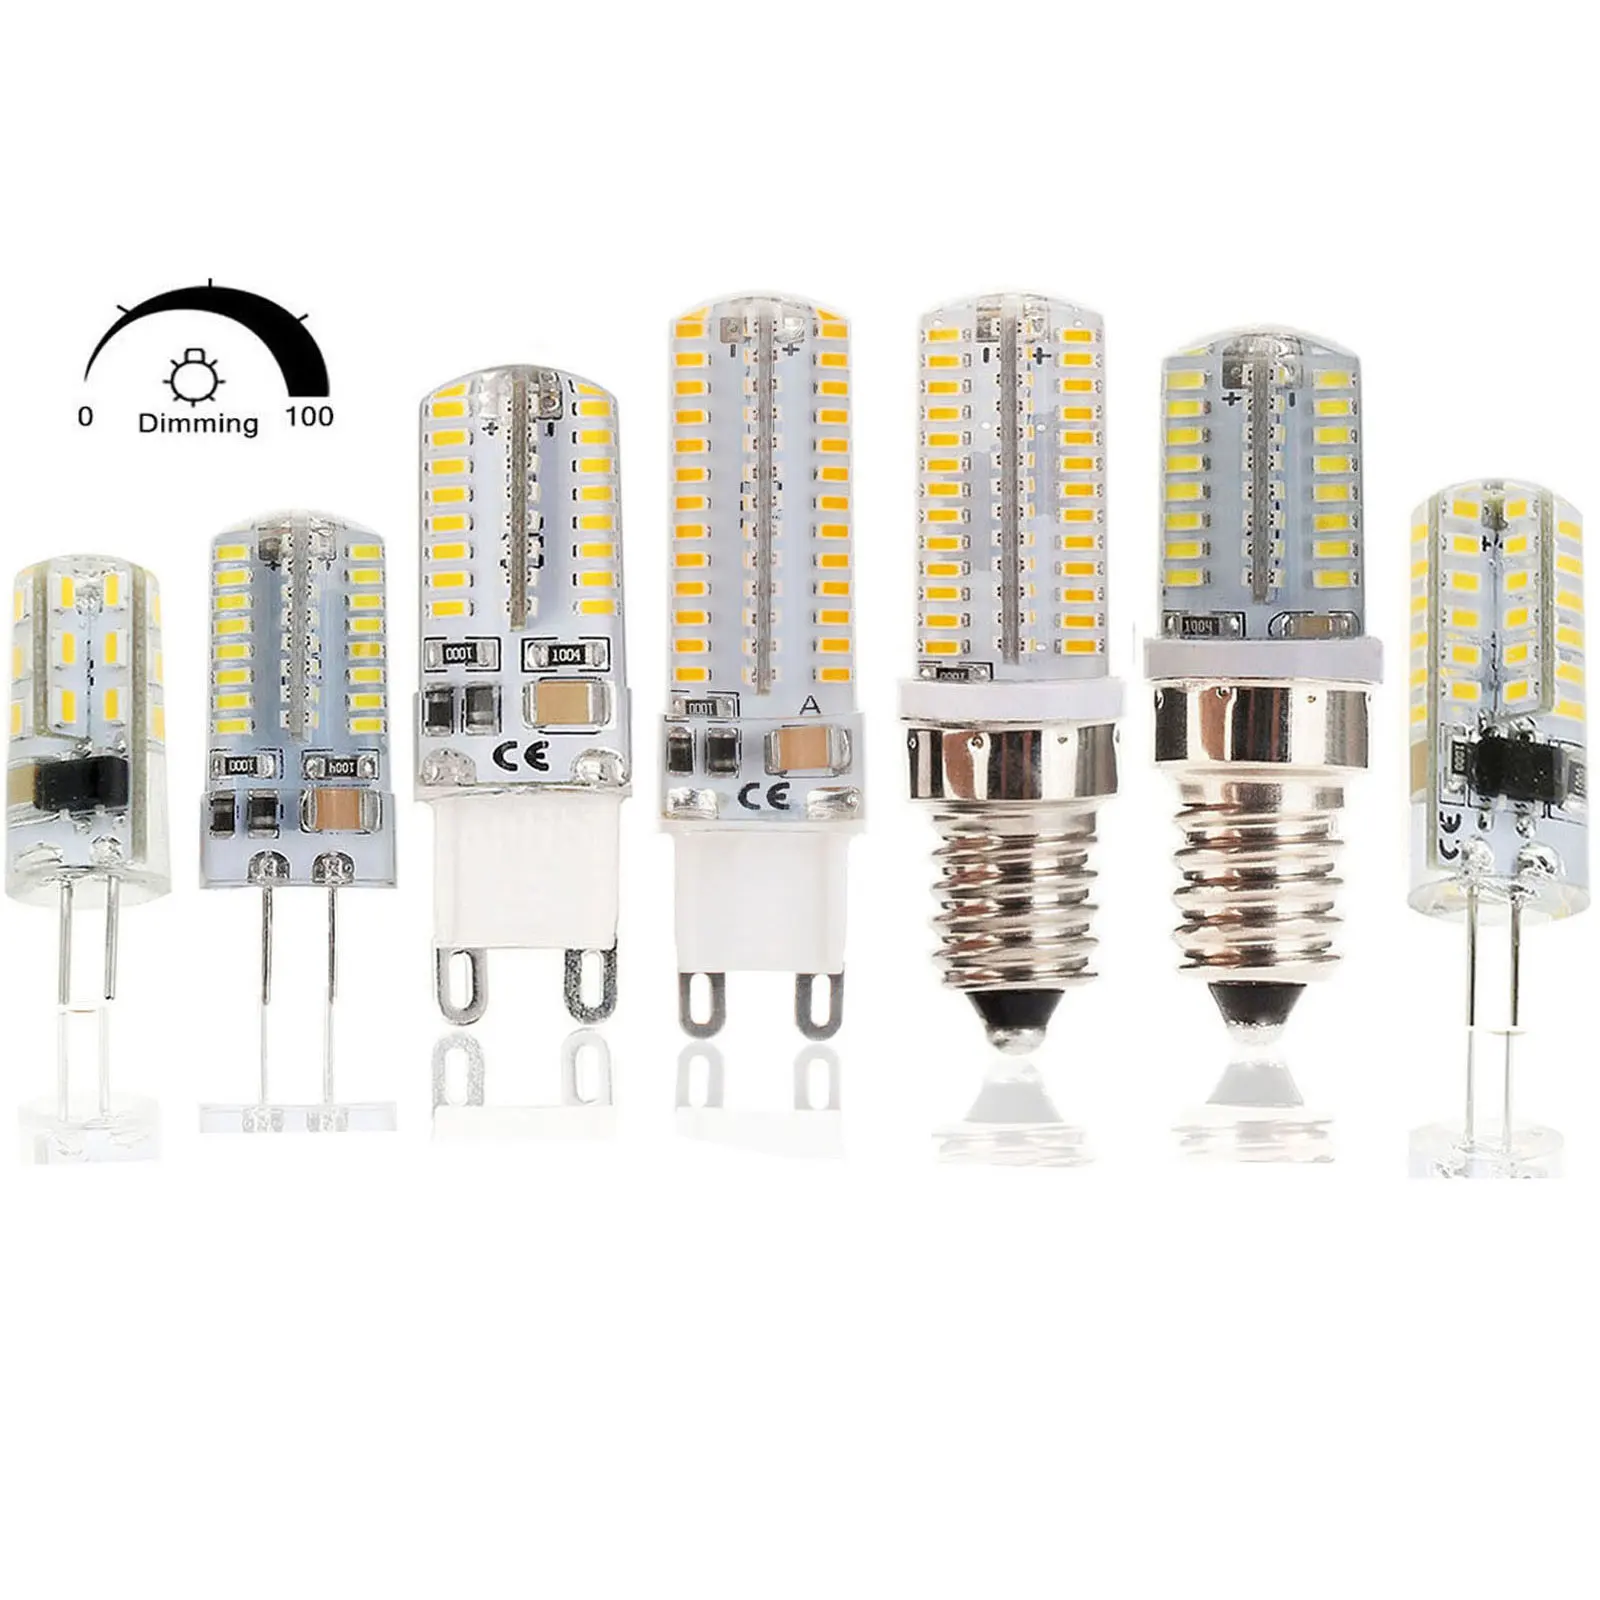 

Dimmable Corn Bulb Silicone LED Lamps SMD-3014 G9 E12 E14 G4 BA15D Energy Saving Replace Halogen Lamp AC 110V 220V